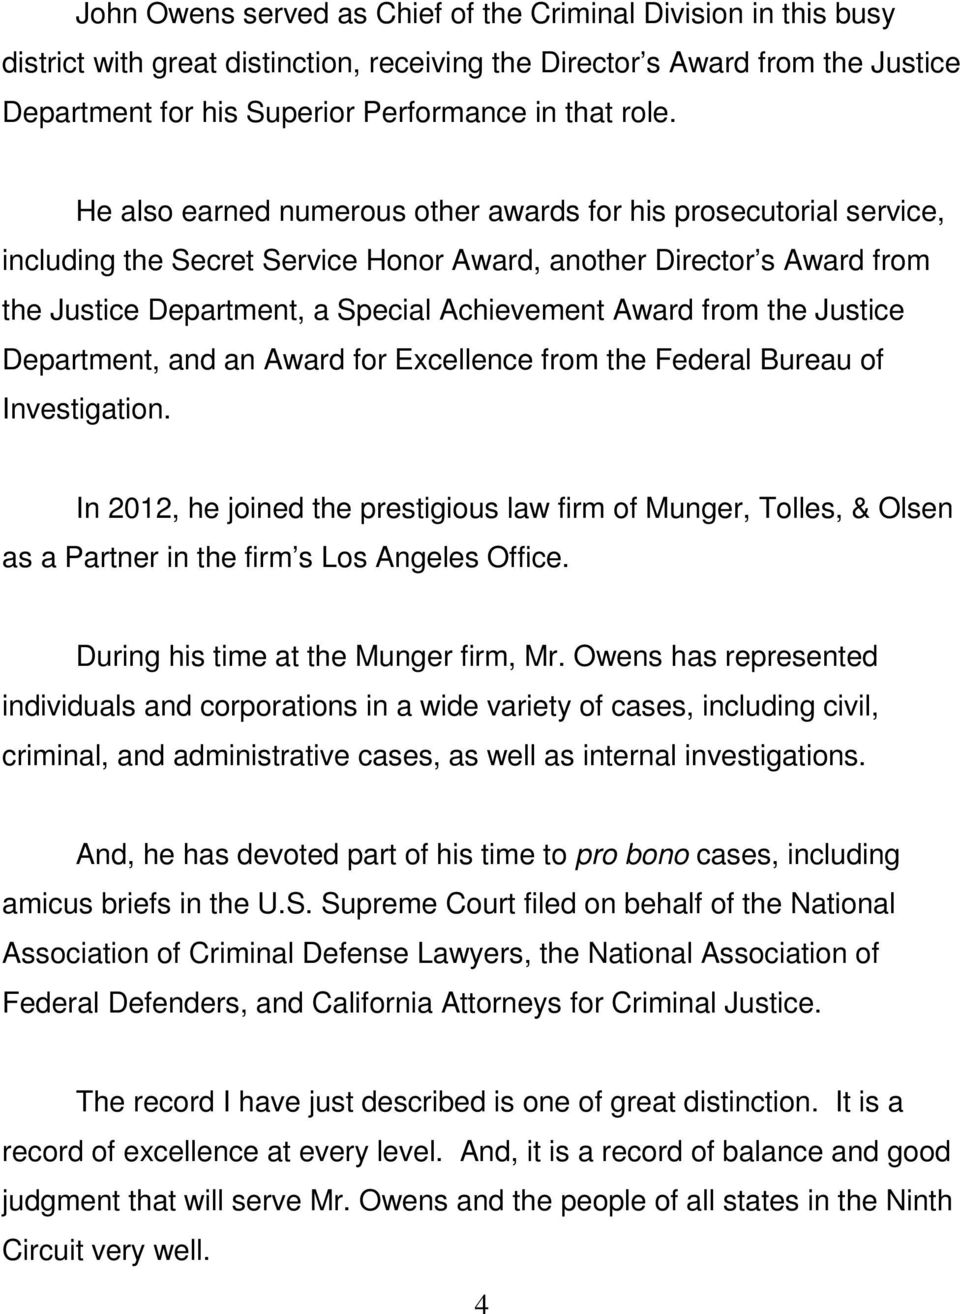 the Justice Department, and an Award for Excellence from the Federal Bureau of Investigation.